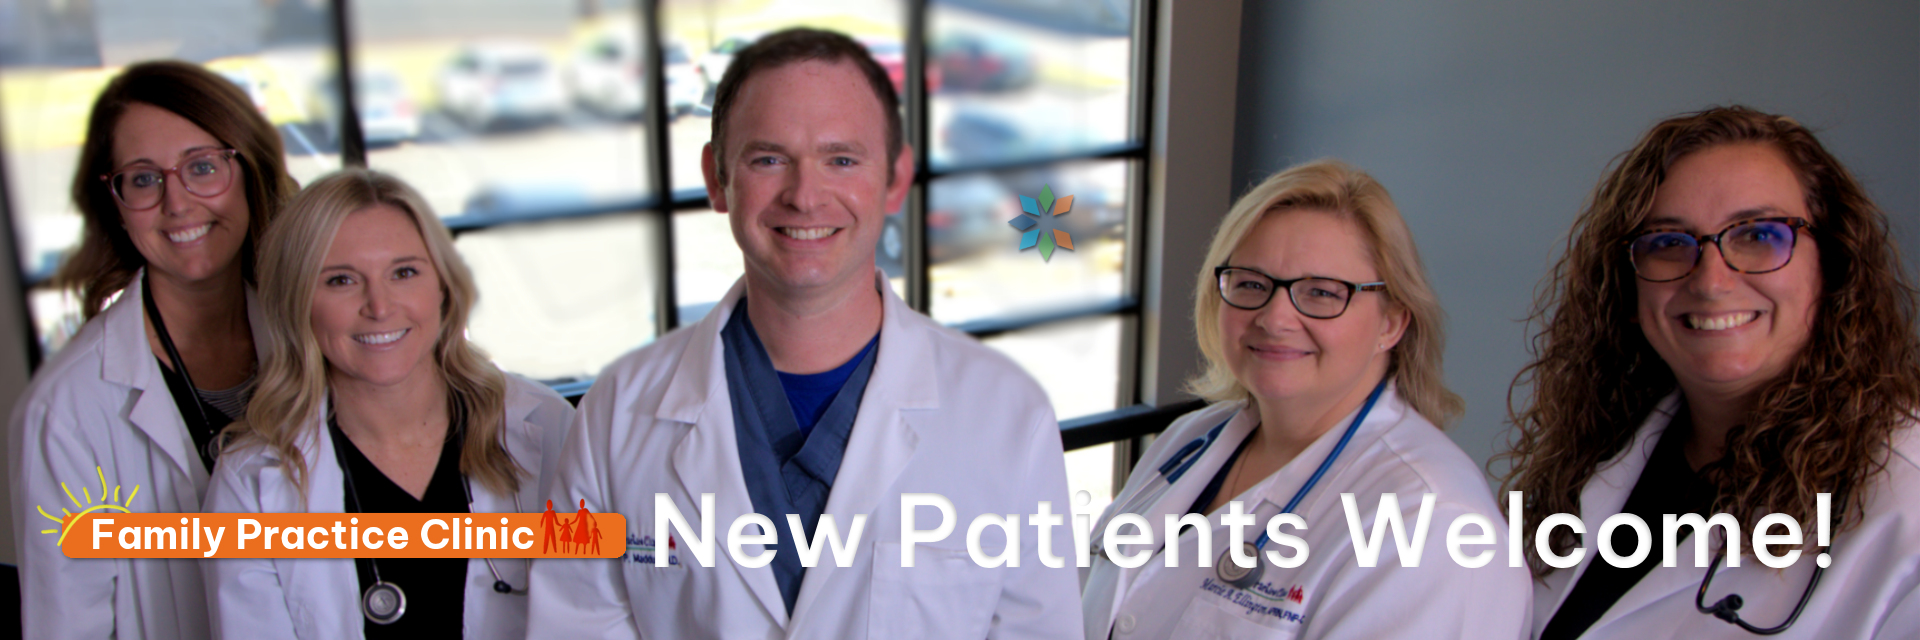 Family Practice Clinic
New Patients Welcome!